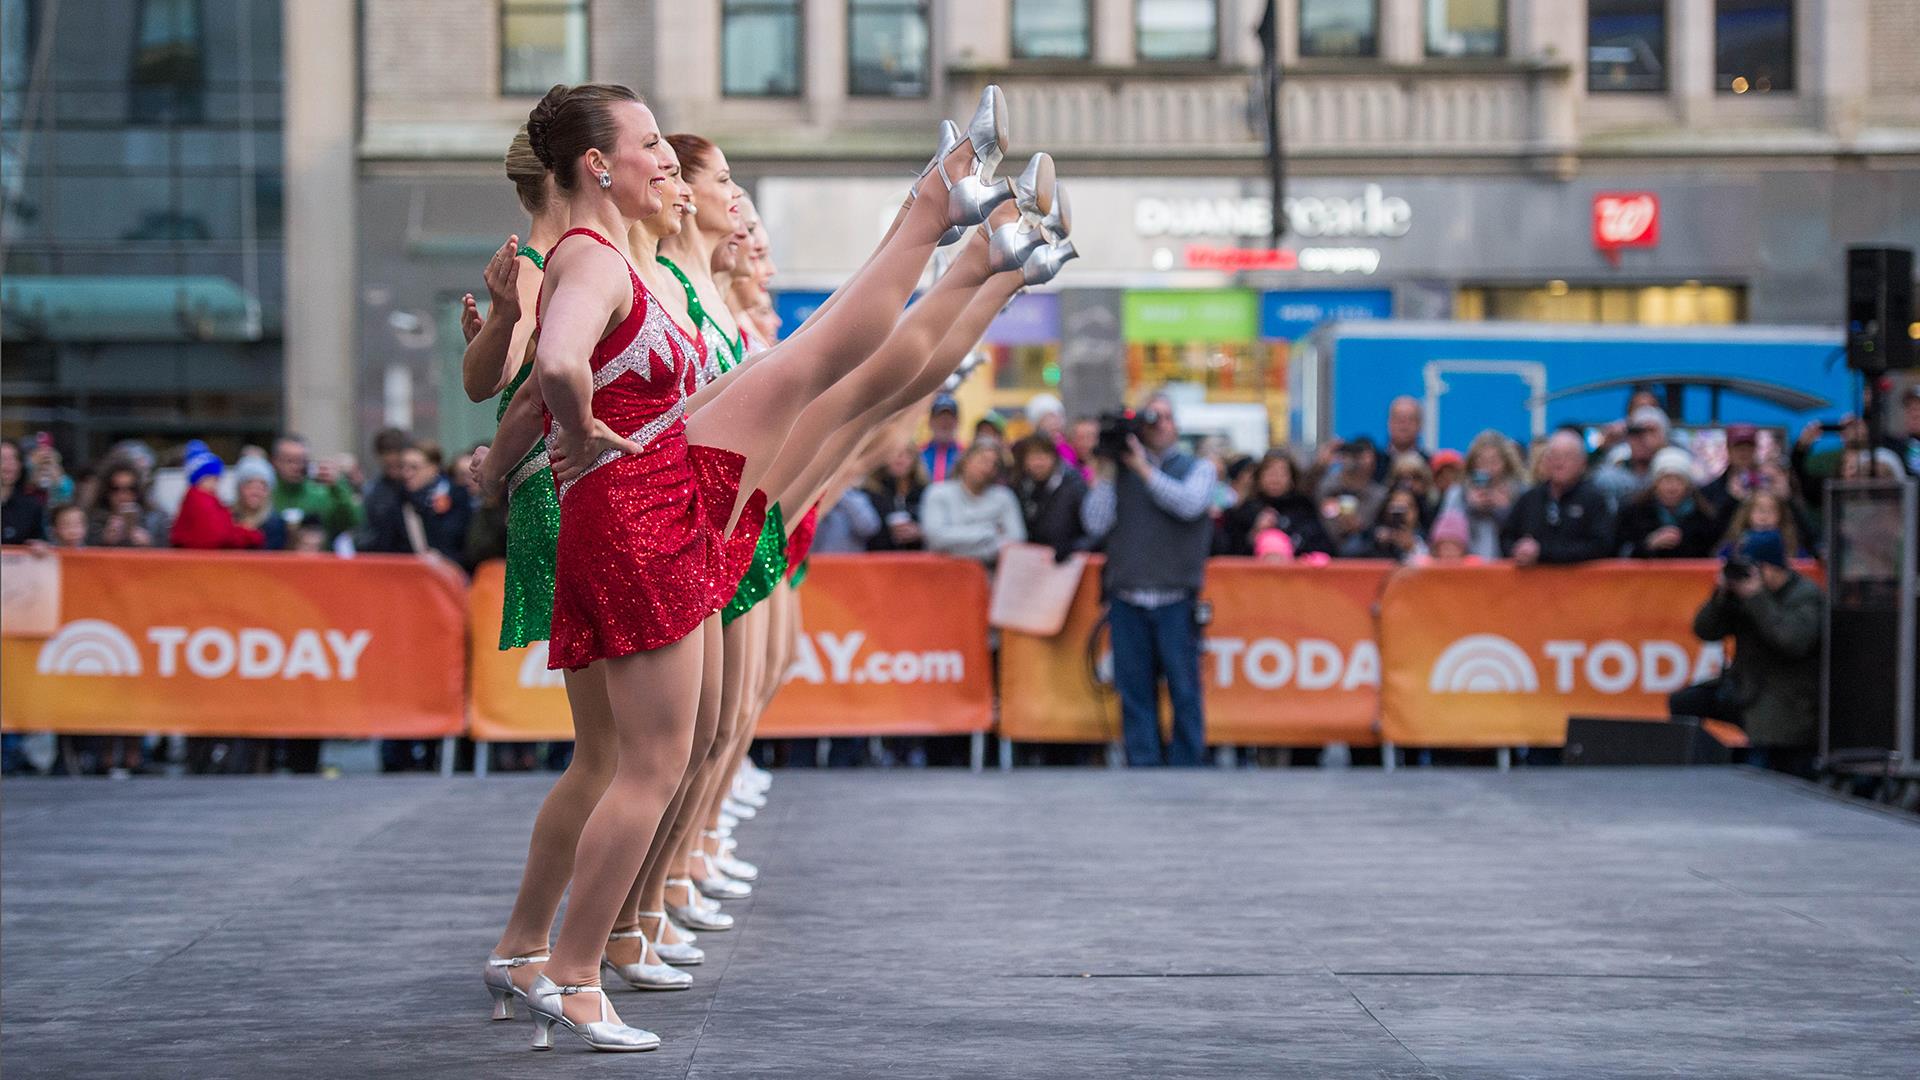 See iconic Rockettes performance of 'Happy Holidays' on the plaza